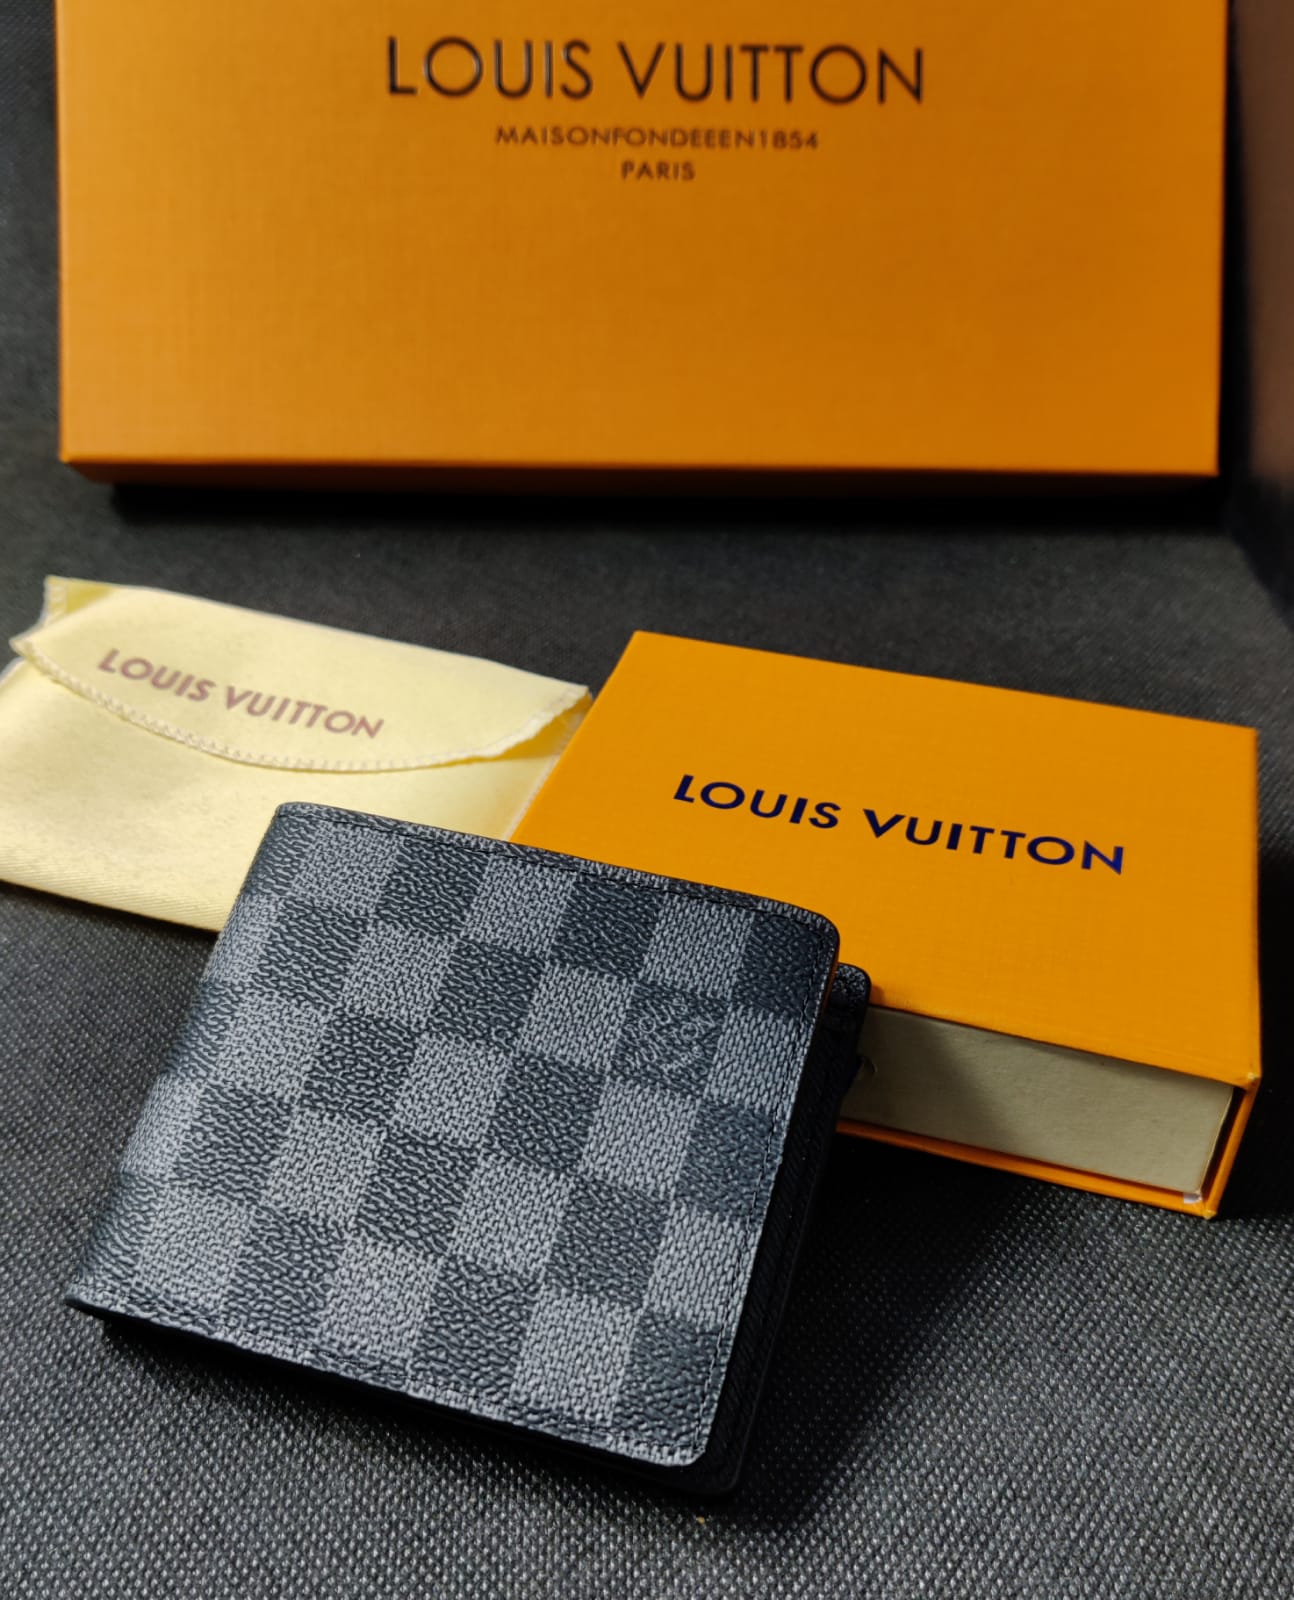 Louis Vuitton Leather Heavy quality latest full printed design Fancy look wallet for men's LV-717